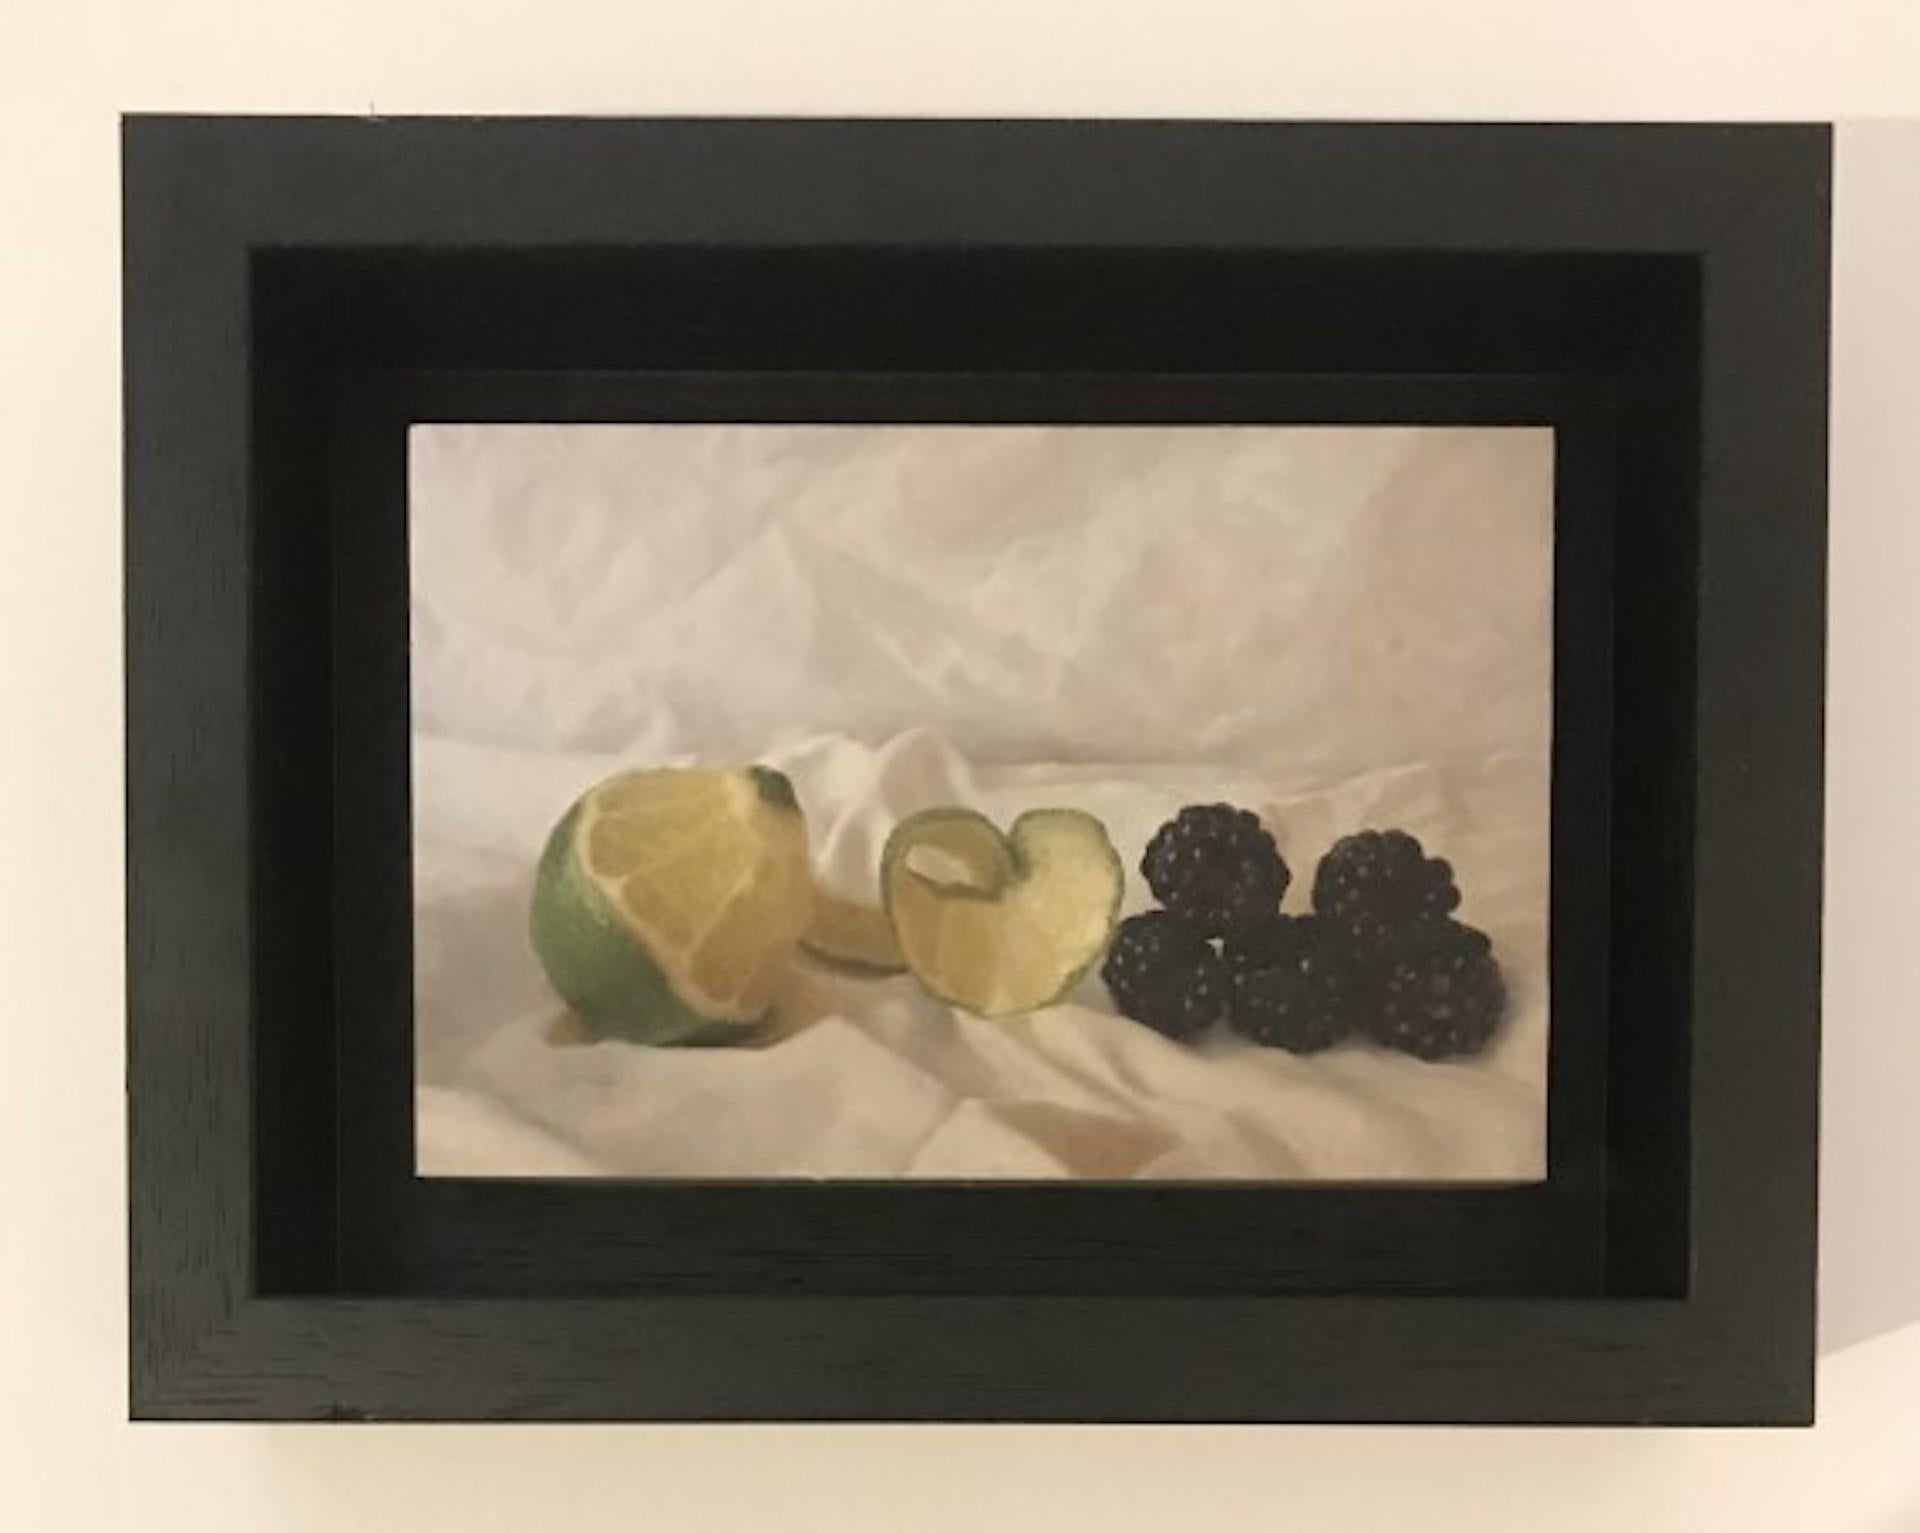 Lime and Blackberries [2020]
Original
Still Life
Oil Paint on Board
Complete Size of Unframed Work: H:10 cm x W:15 cm x D:2.5cm
Framed Size: H:16 cm x W:21 cm x D:5.5cm
Sold Framed
Please note that insitu images are purely an indication of how a